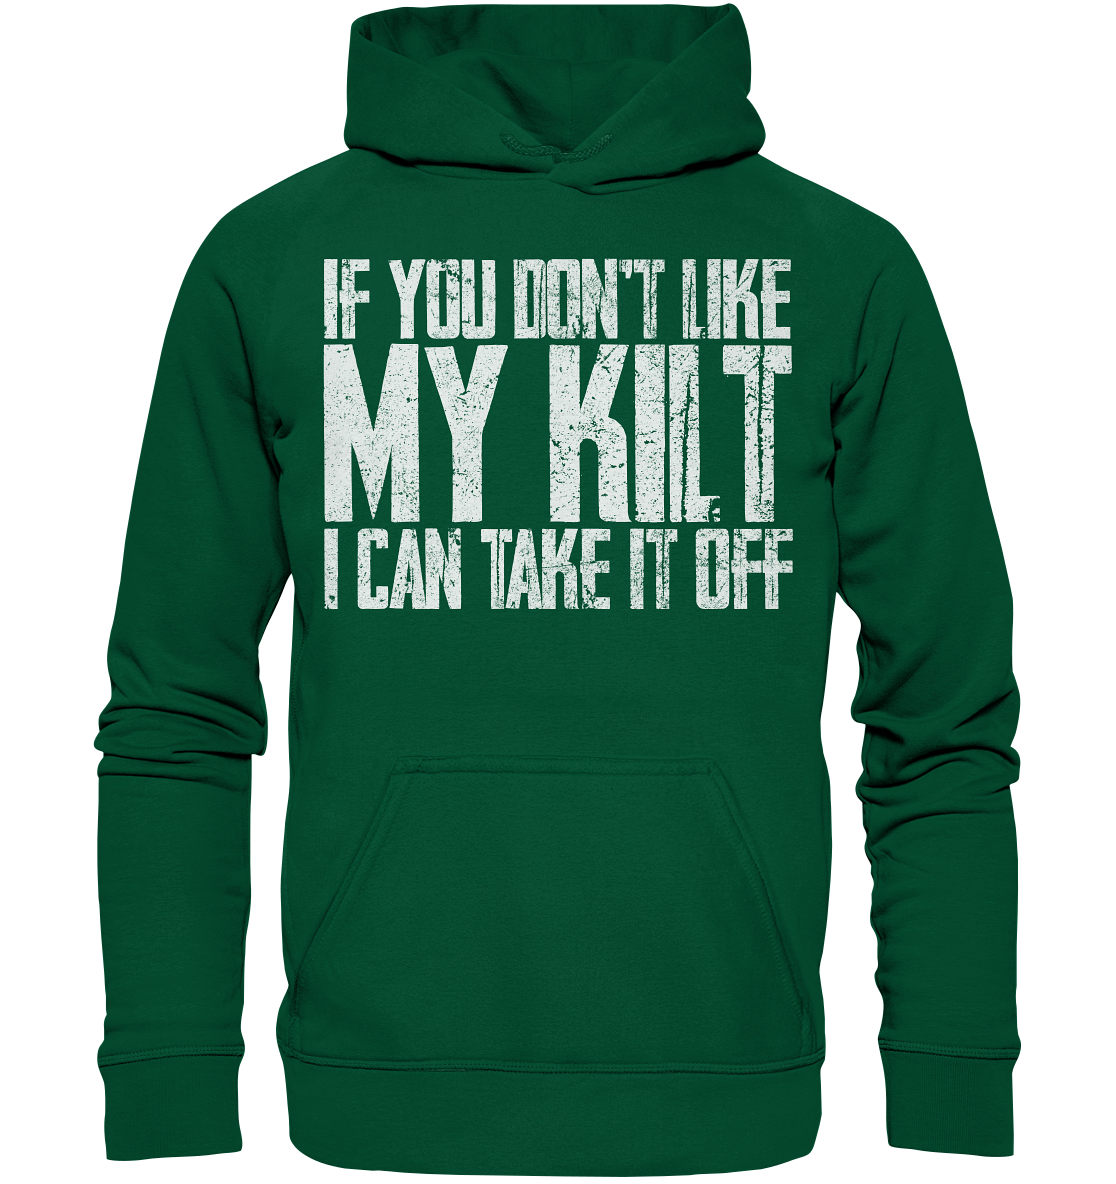 If You Don't Like My Kilt, I Can Take It Off - Basic Unisex Hoodie